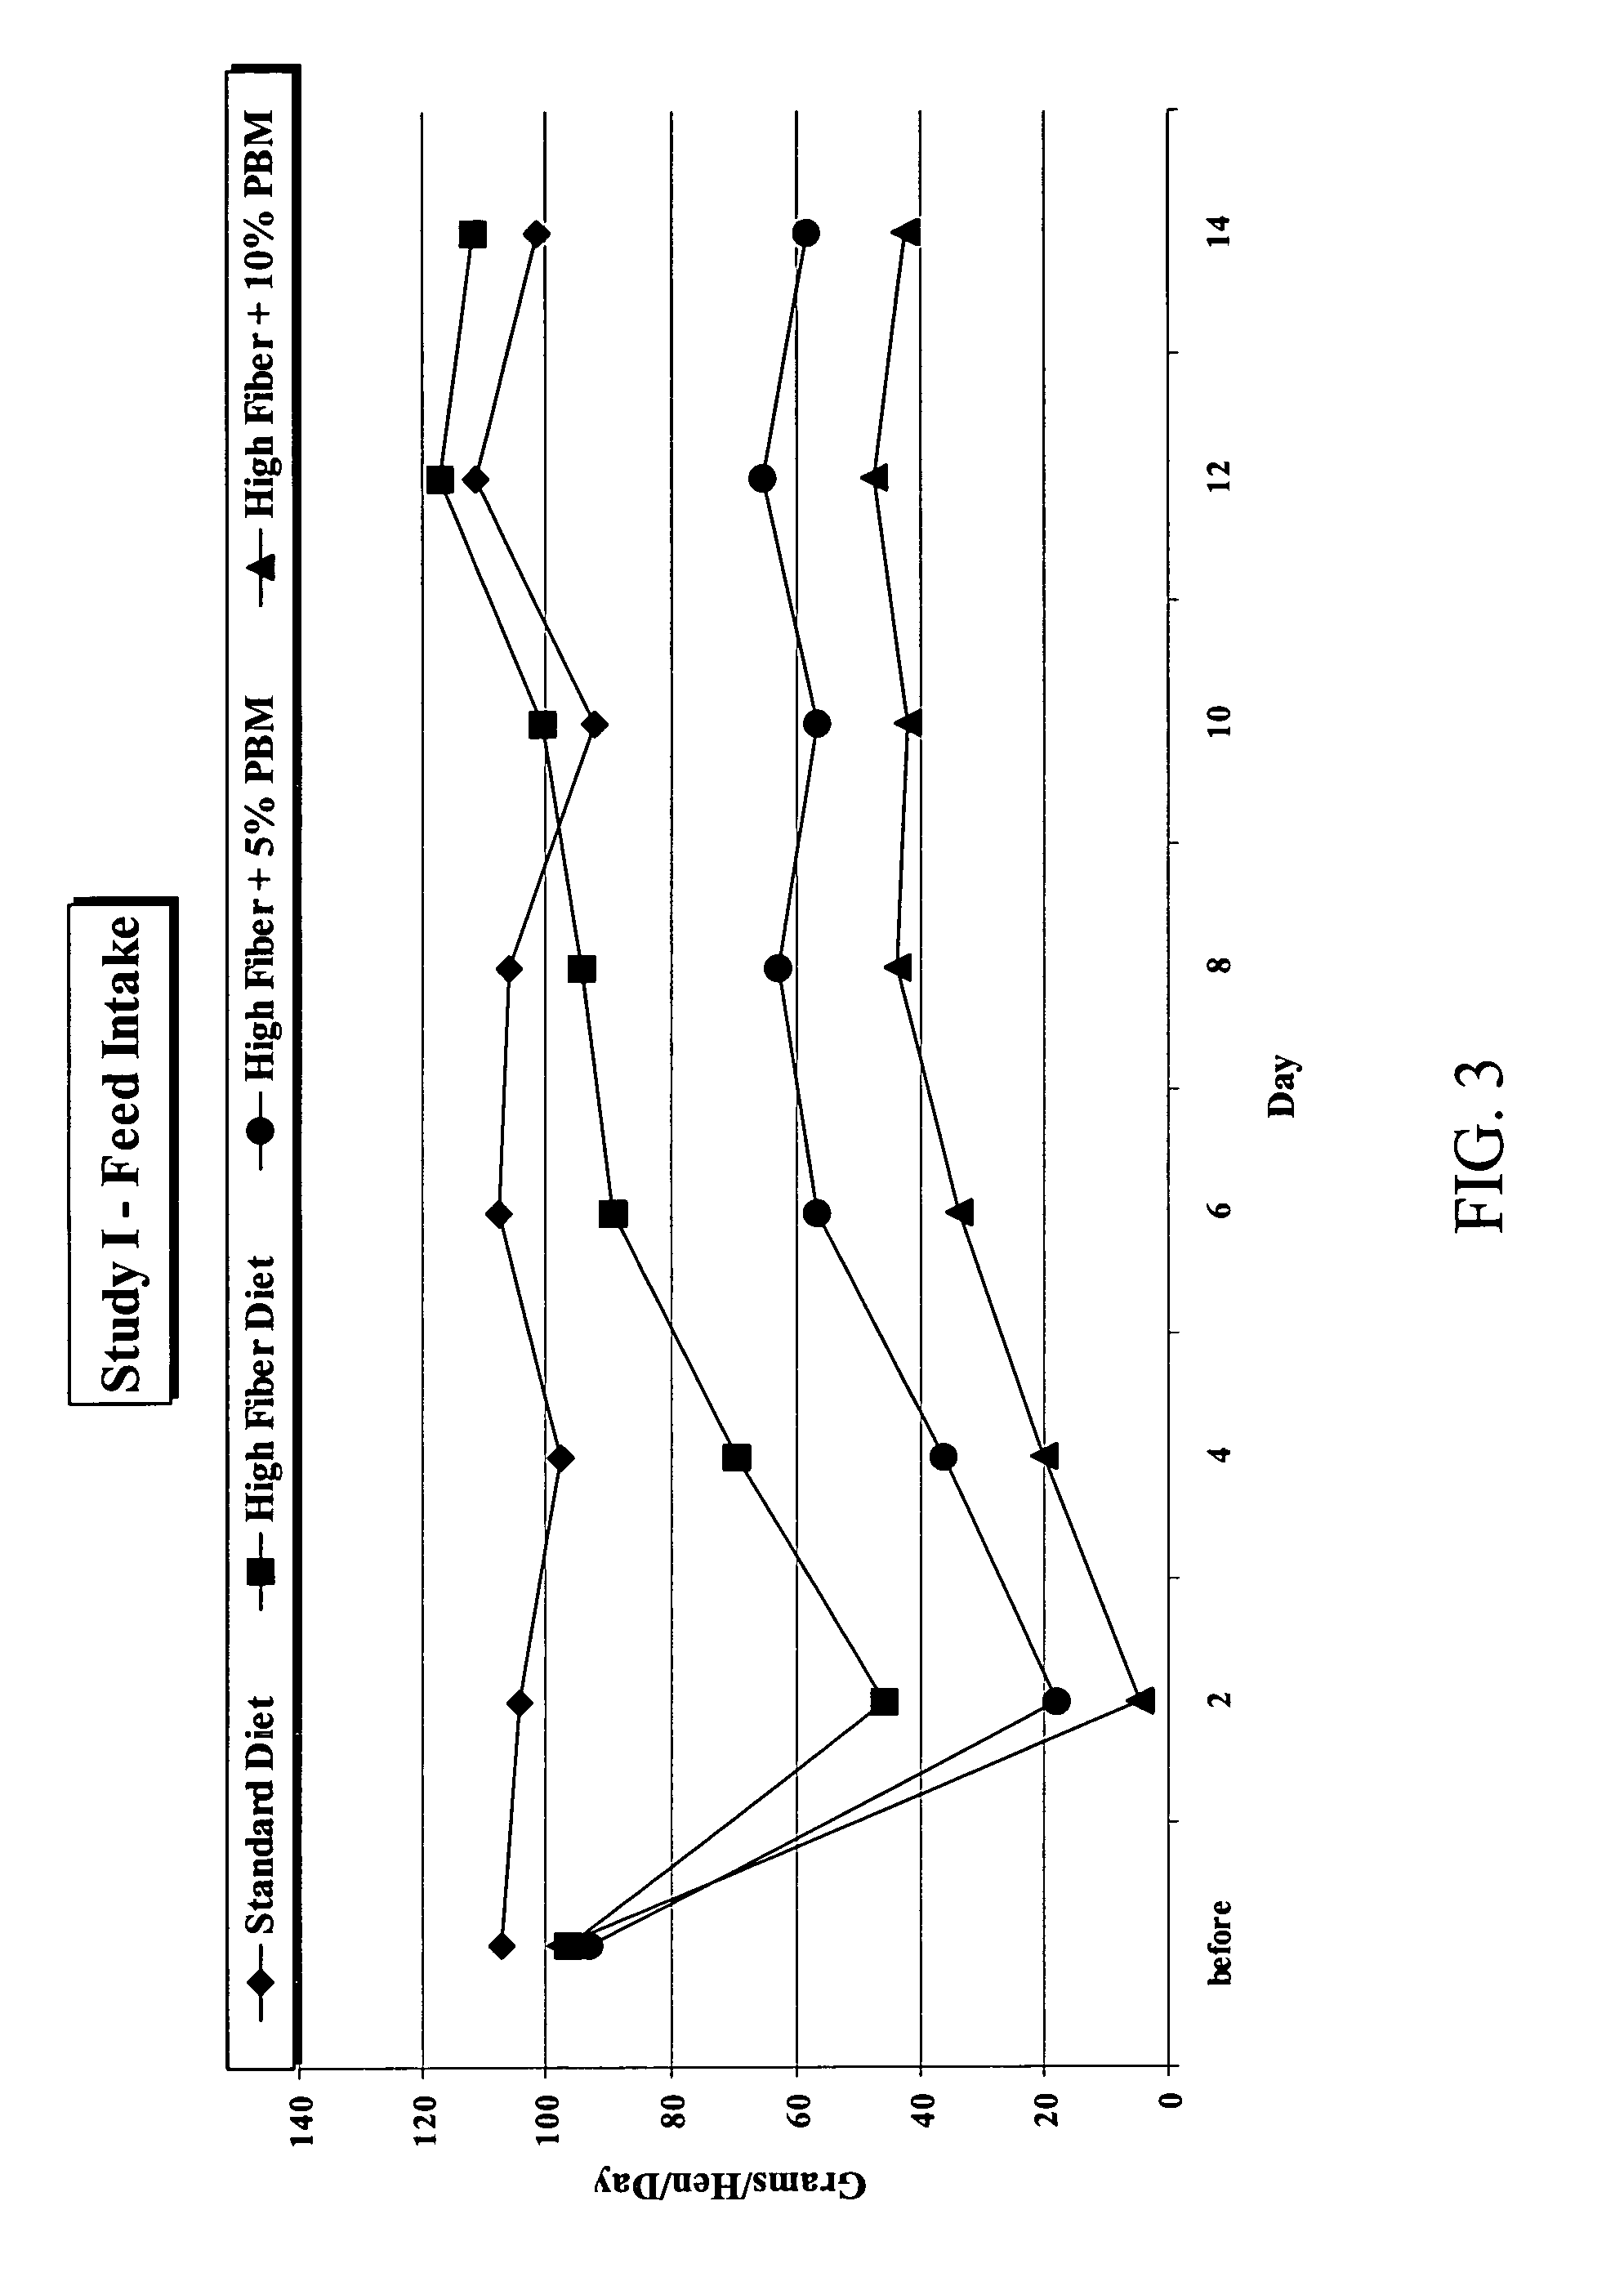 Chicken feed composition and method of feeding chickens for promoting health or rejuvenating egg production